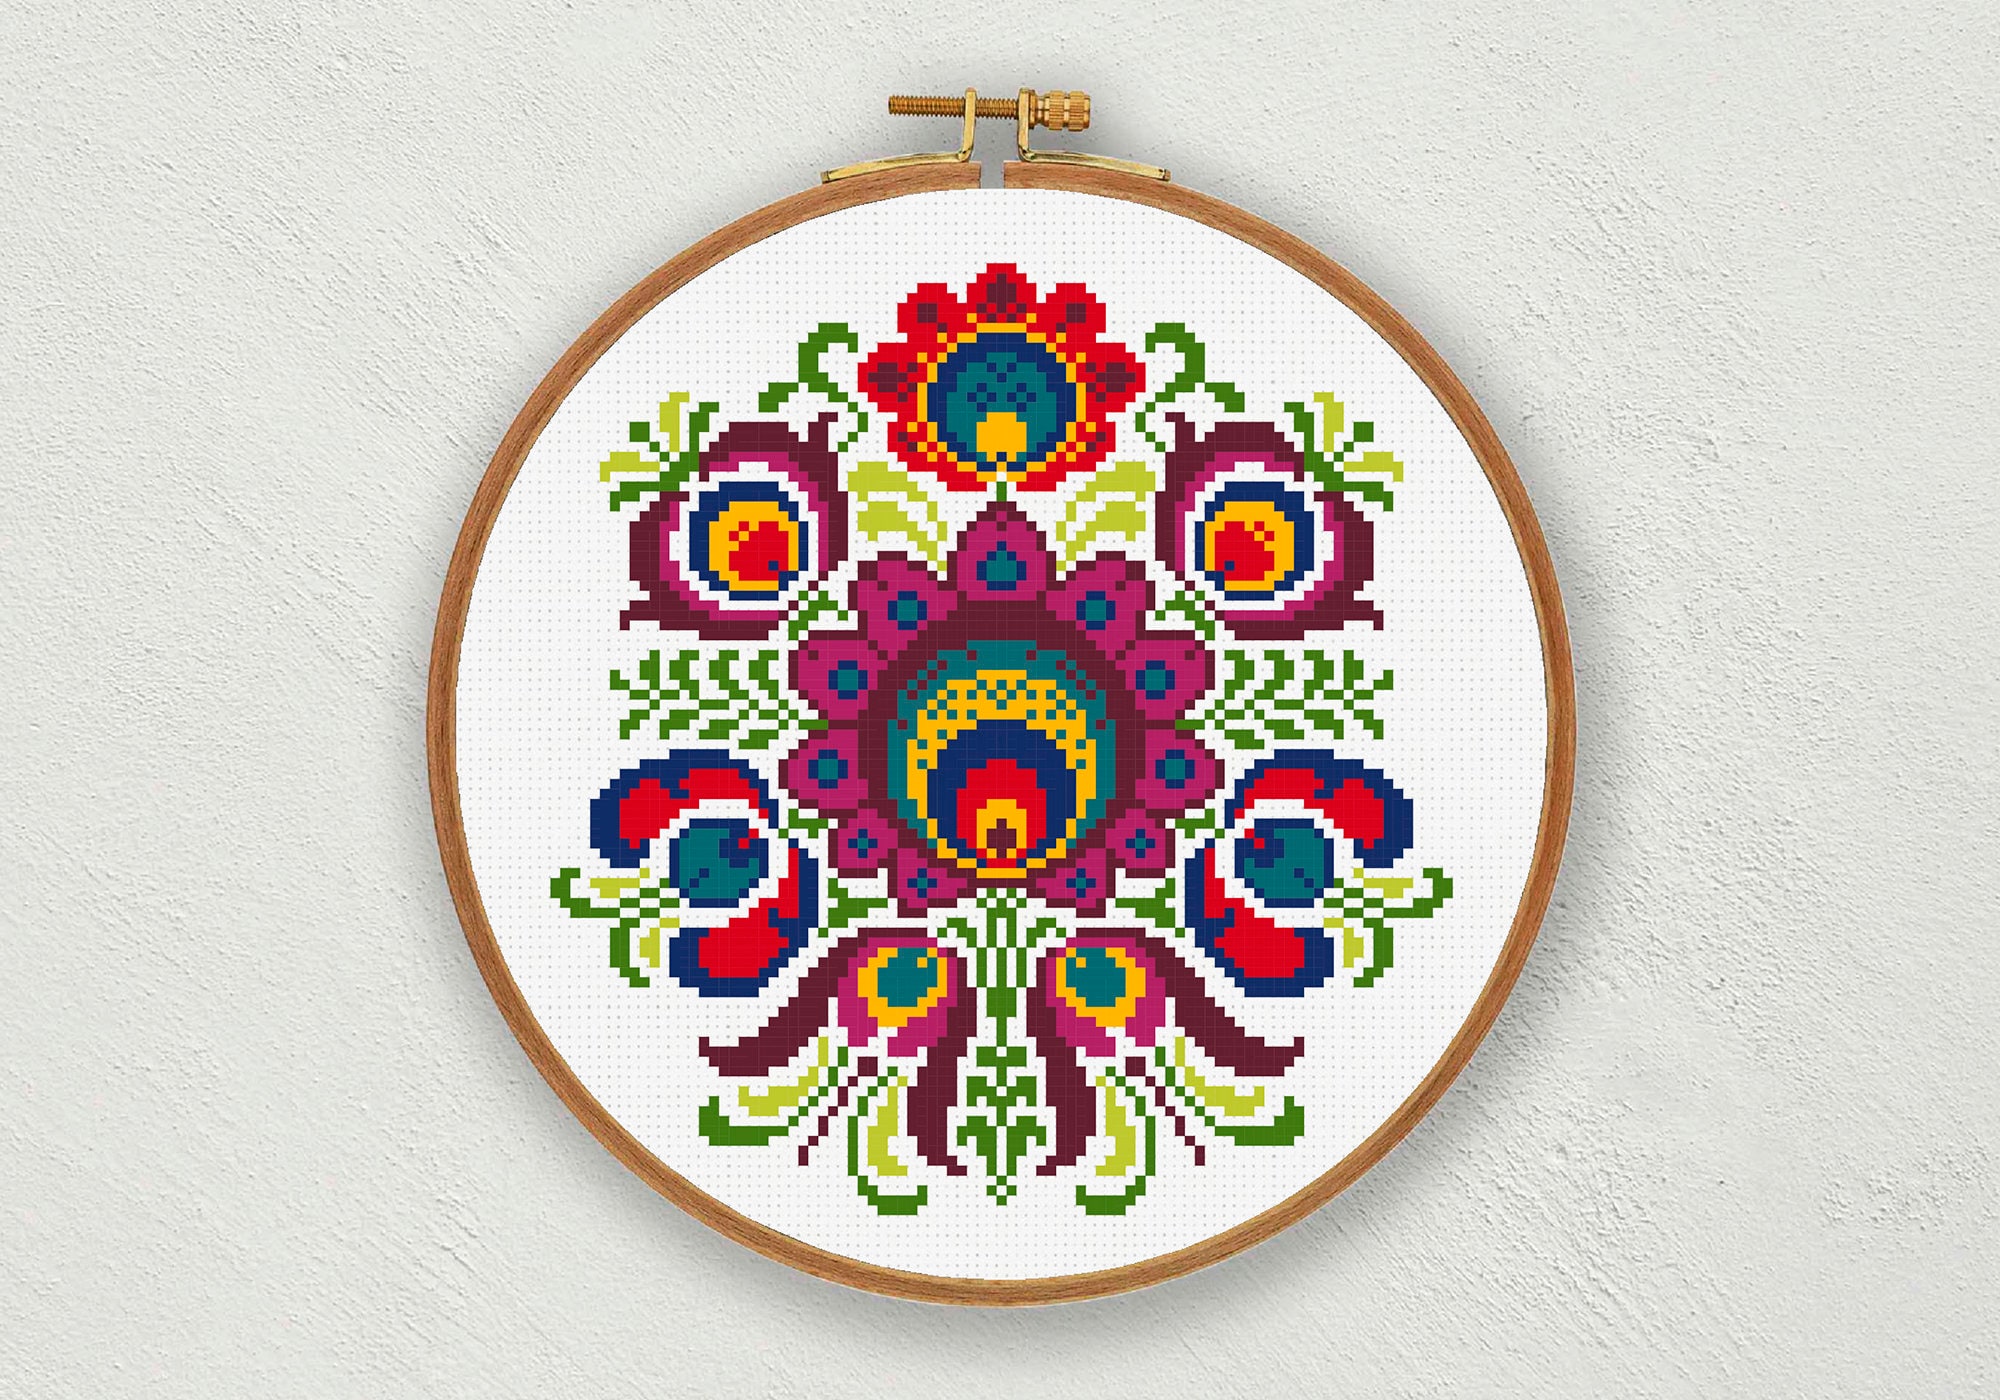 Floral Folk Art in Cross Stitch: free chart! - Hobbies and Crafts